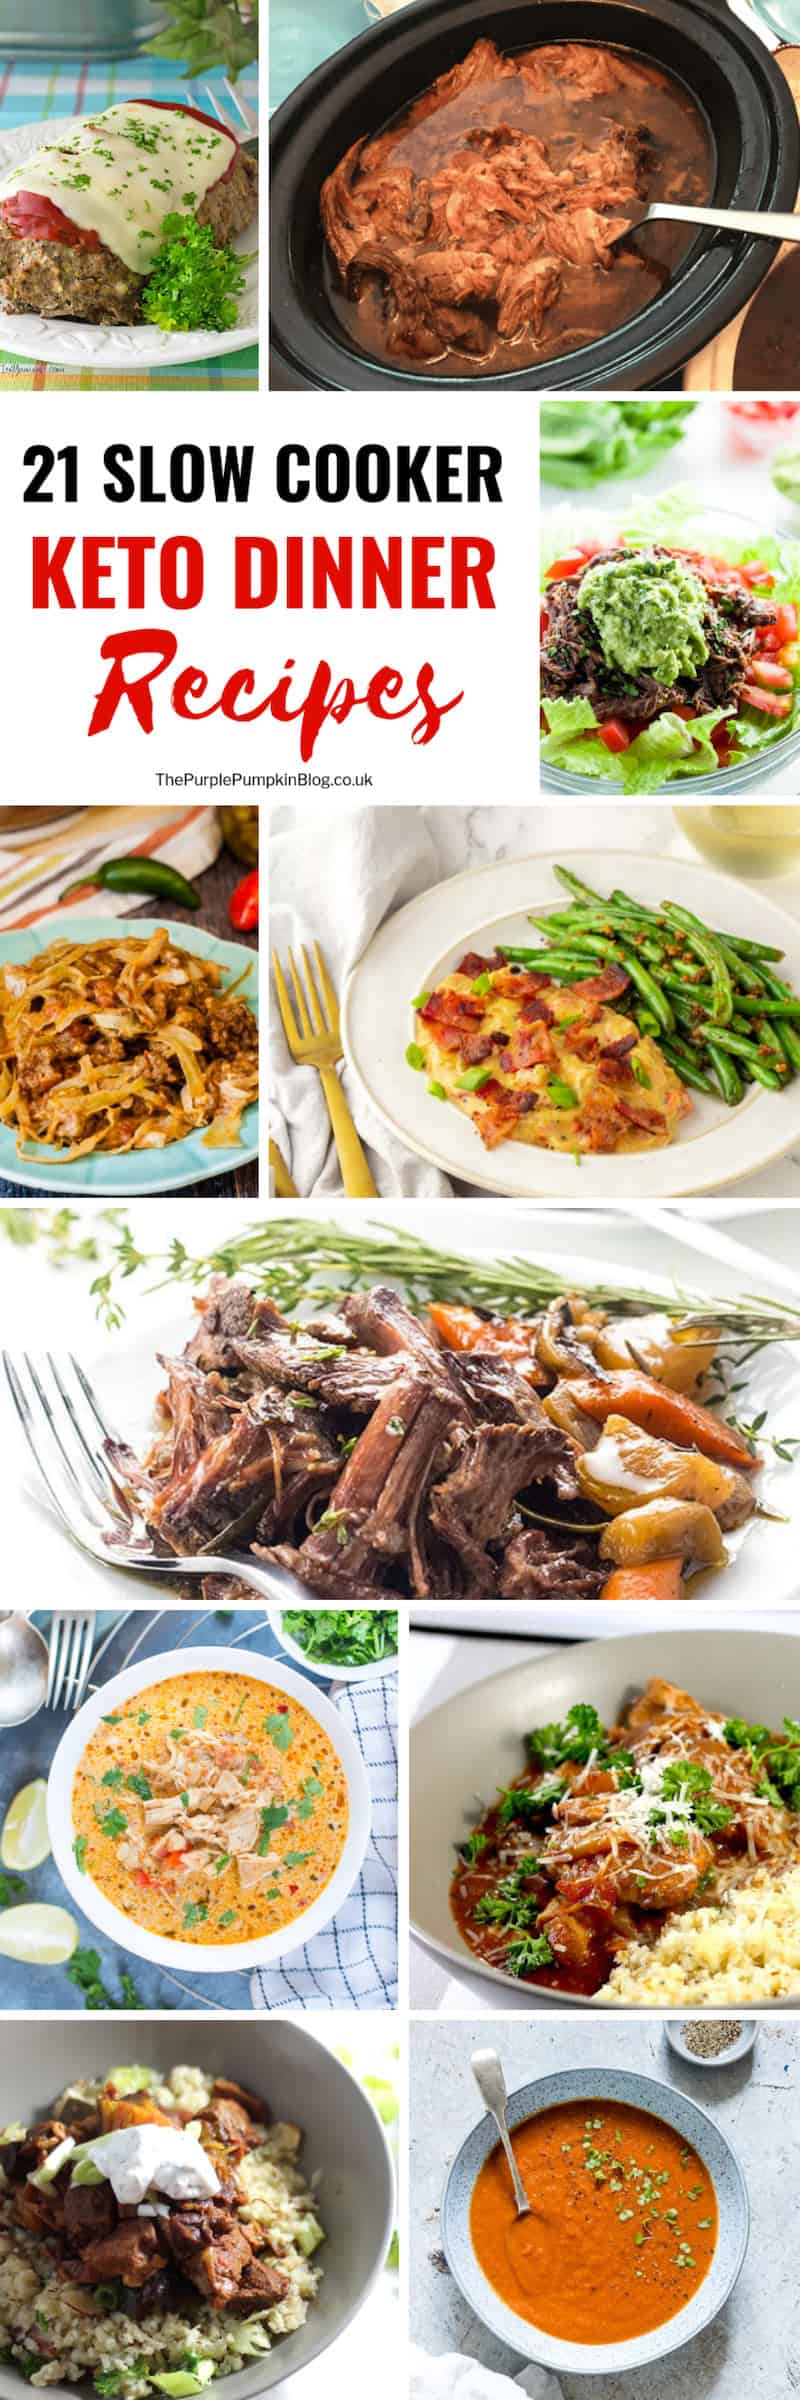 Take the stress out of dinner time with one of these slow cooker keto dinner recipes. Just dump all the ingredients into a slow cooker/crock pot and go about your day, knowing that a delicious low carb, keto dinner is waiting for you!